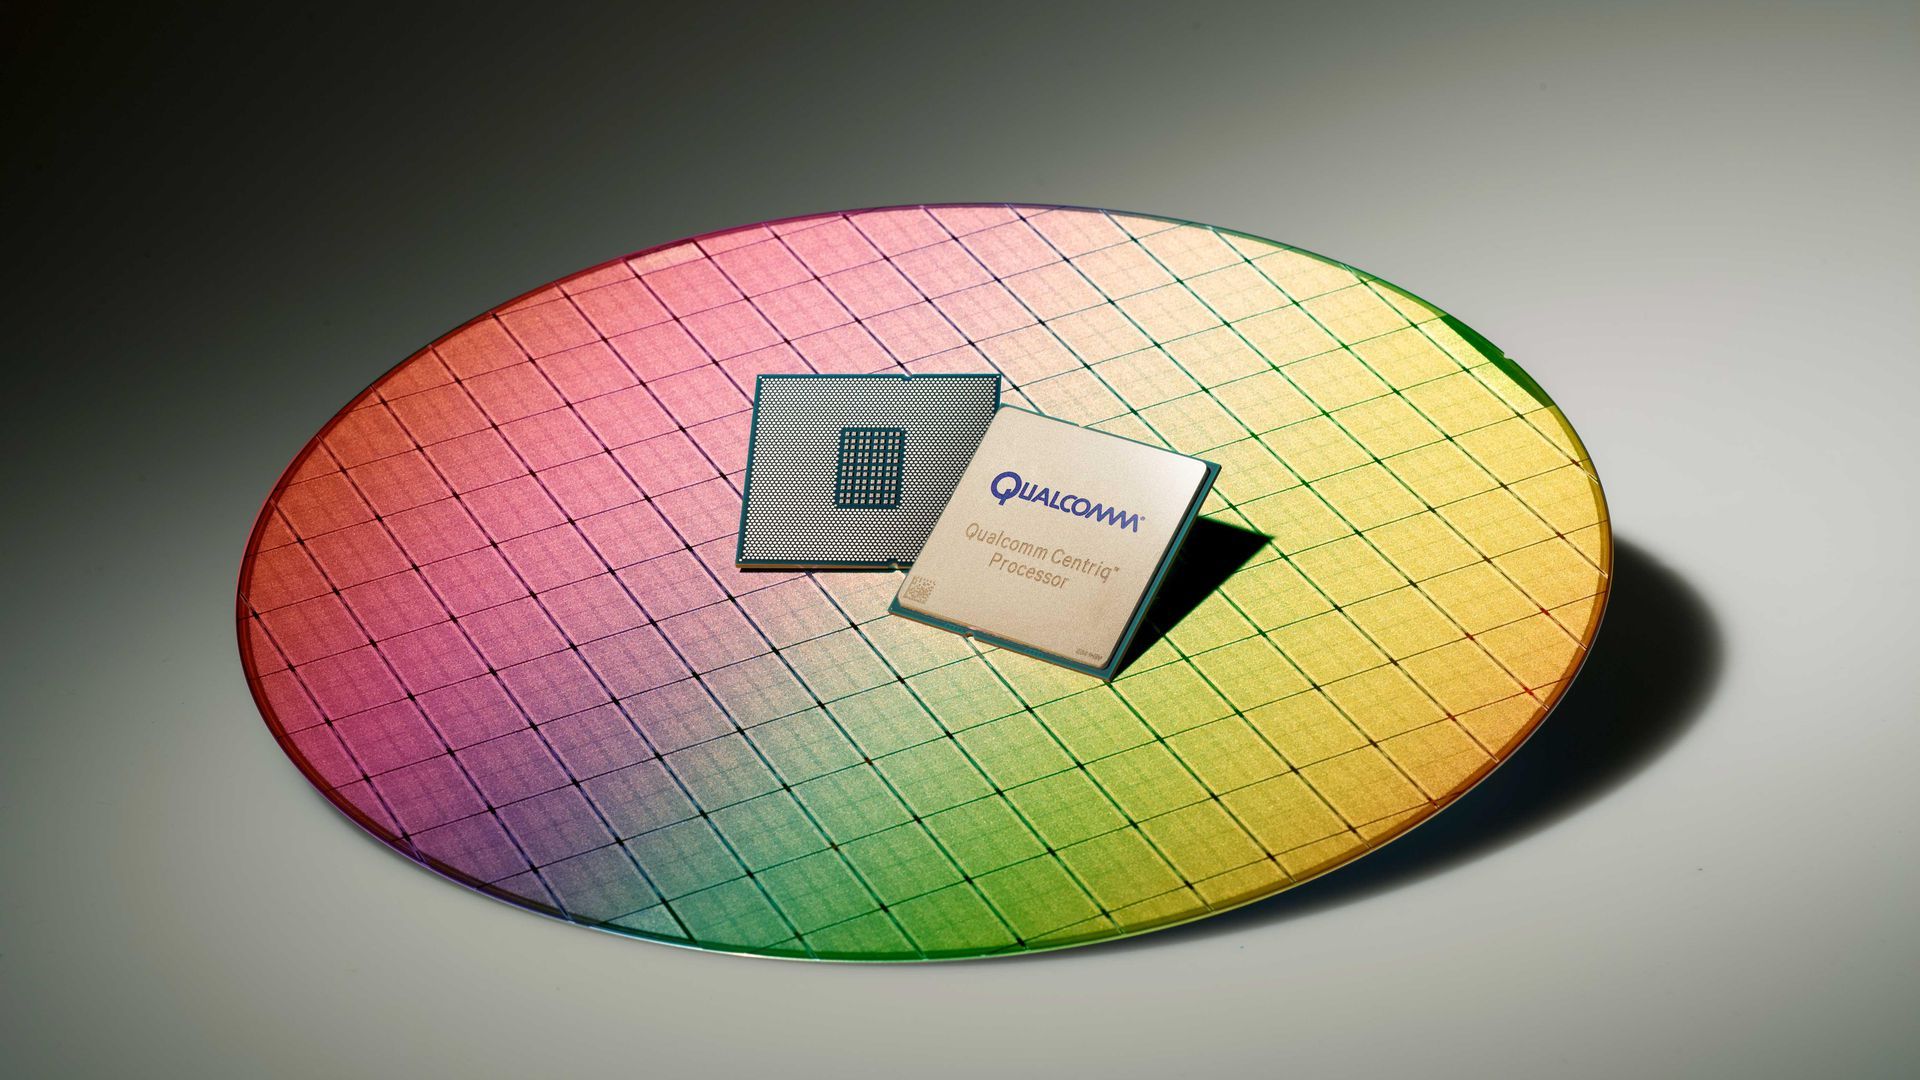 A pair of Qualcomm chips on a chip wafer